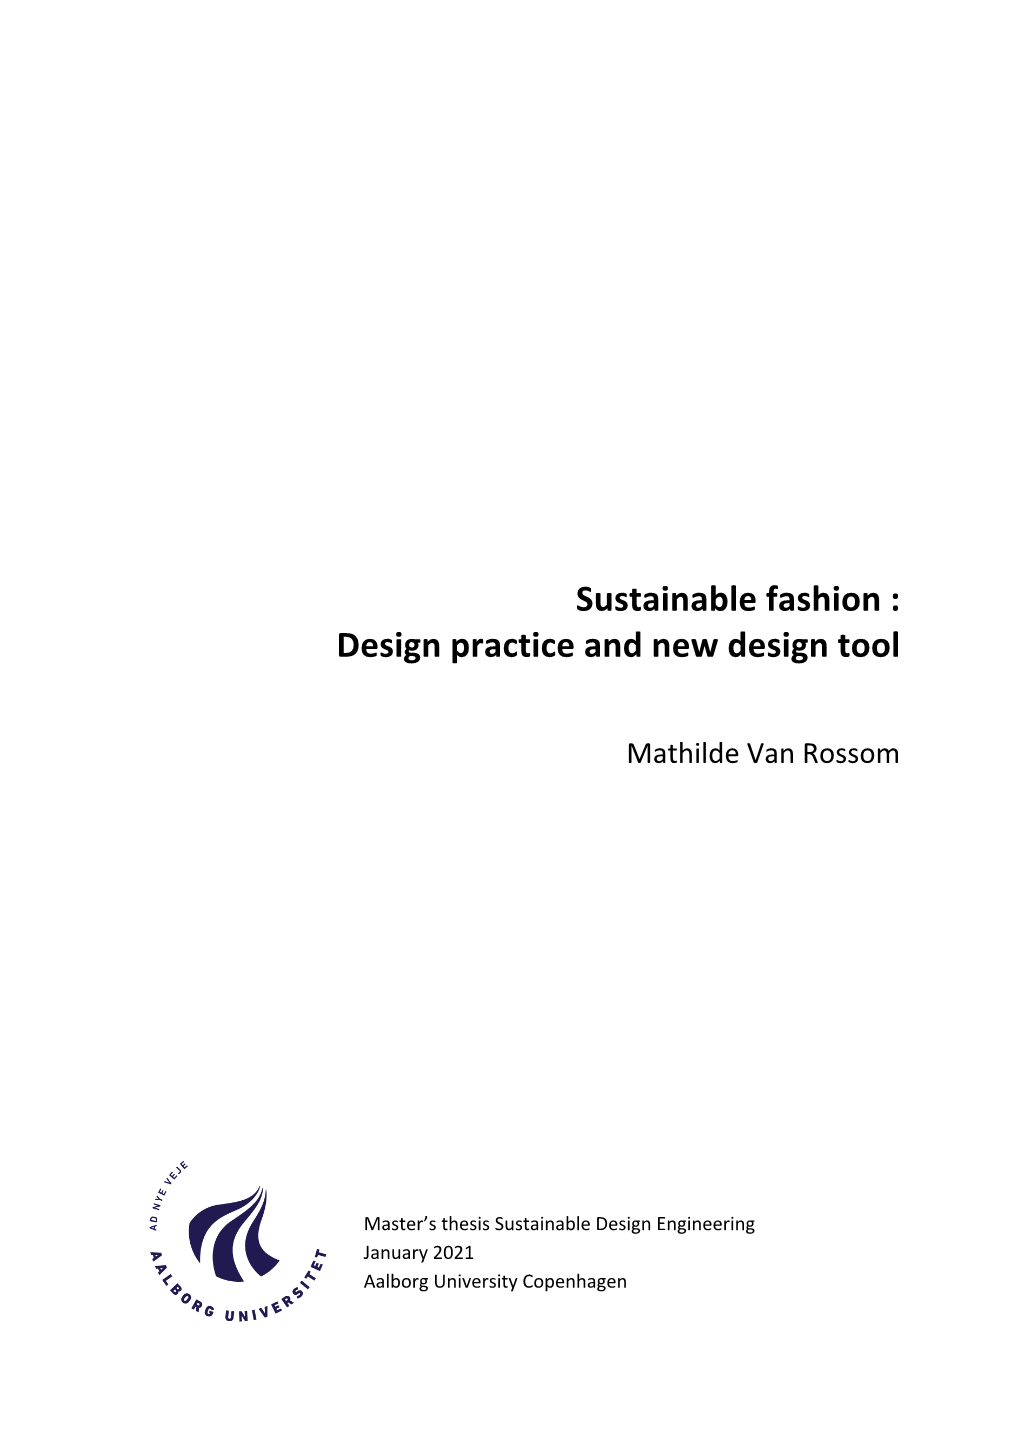 Sustainable Fashion : Design Practice and New Design Tool